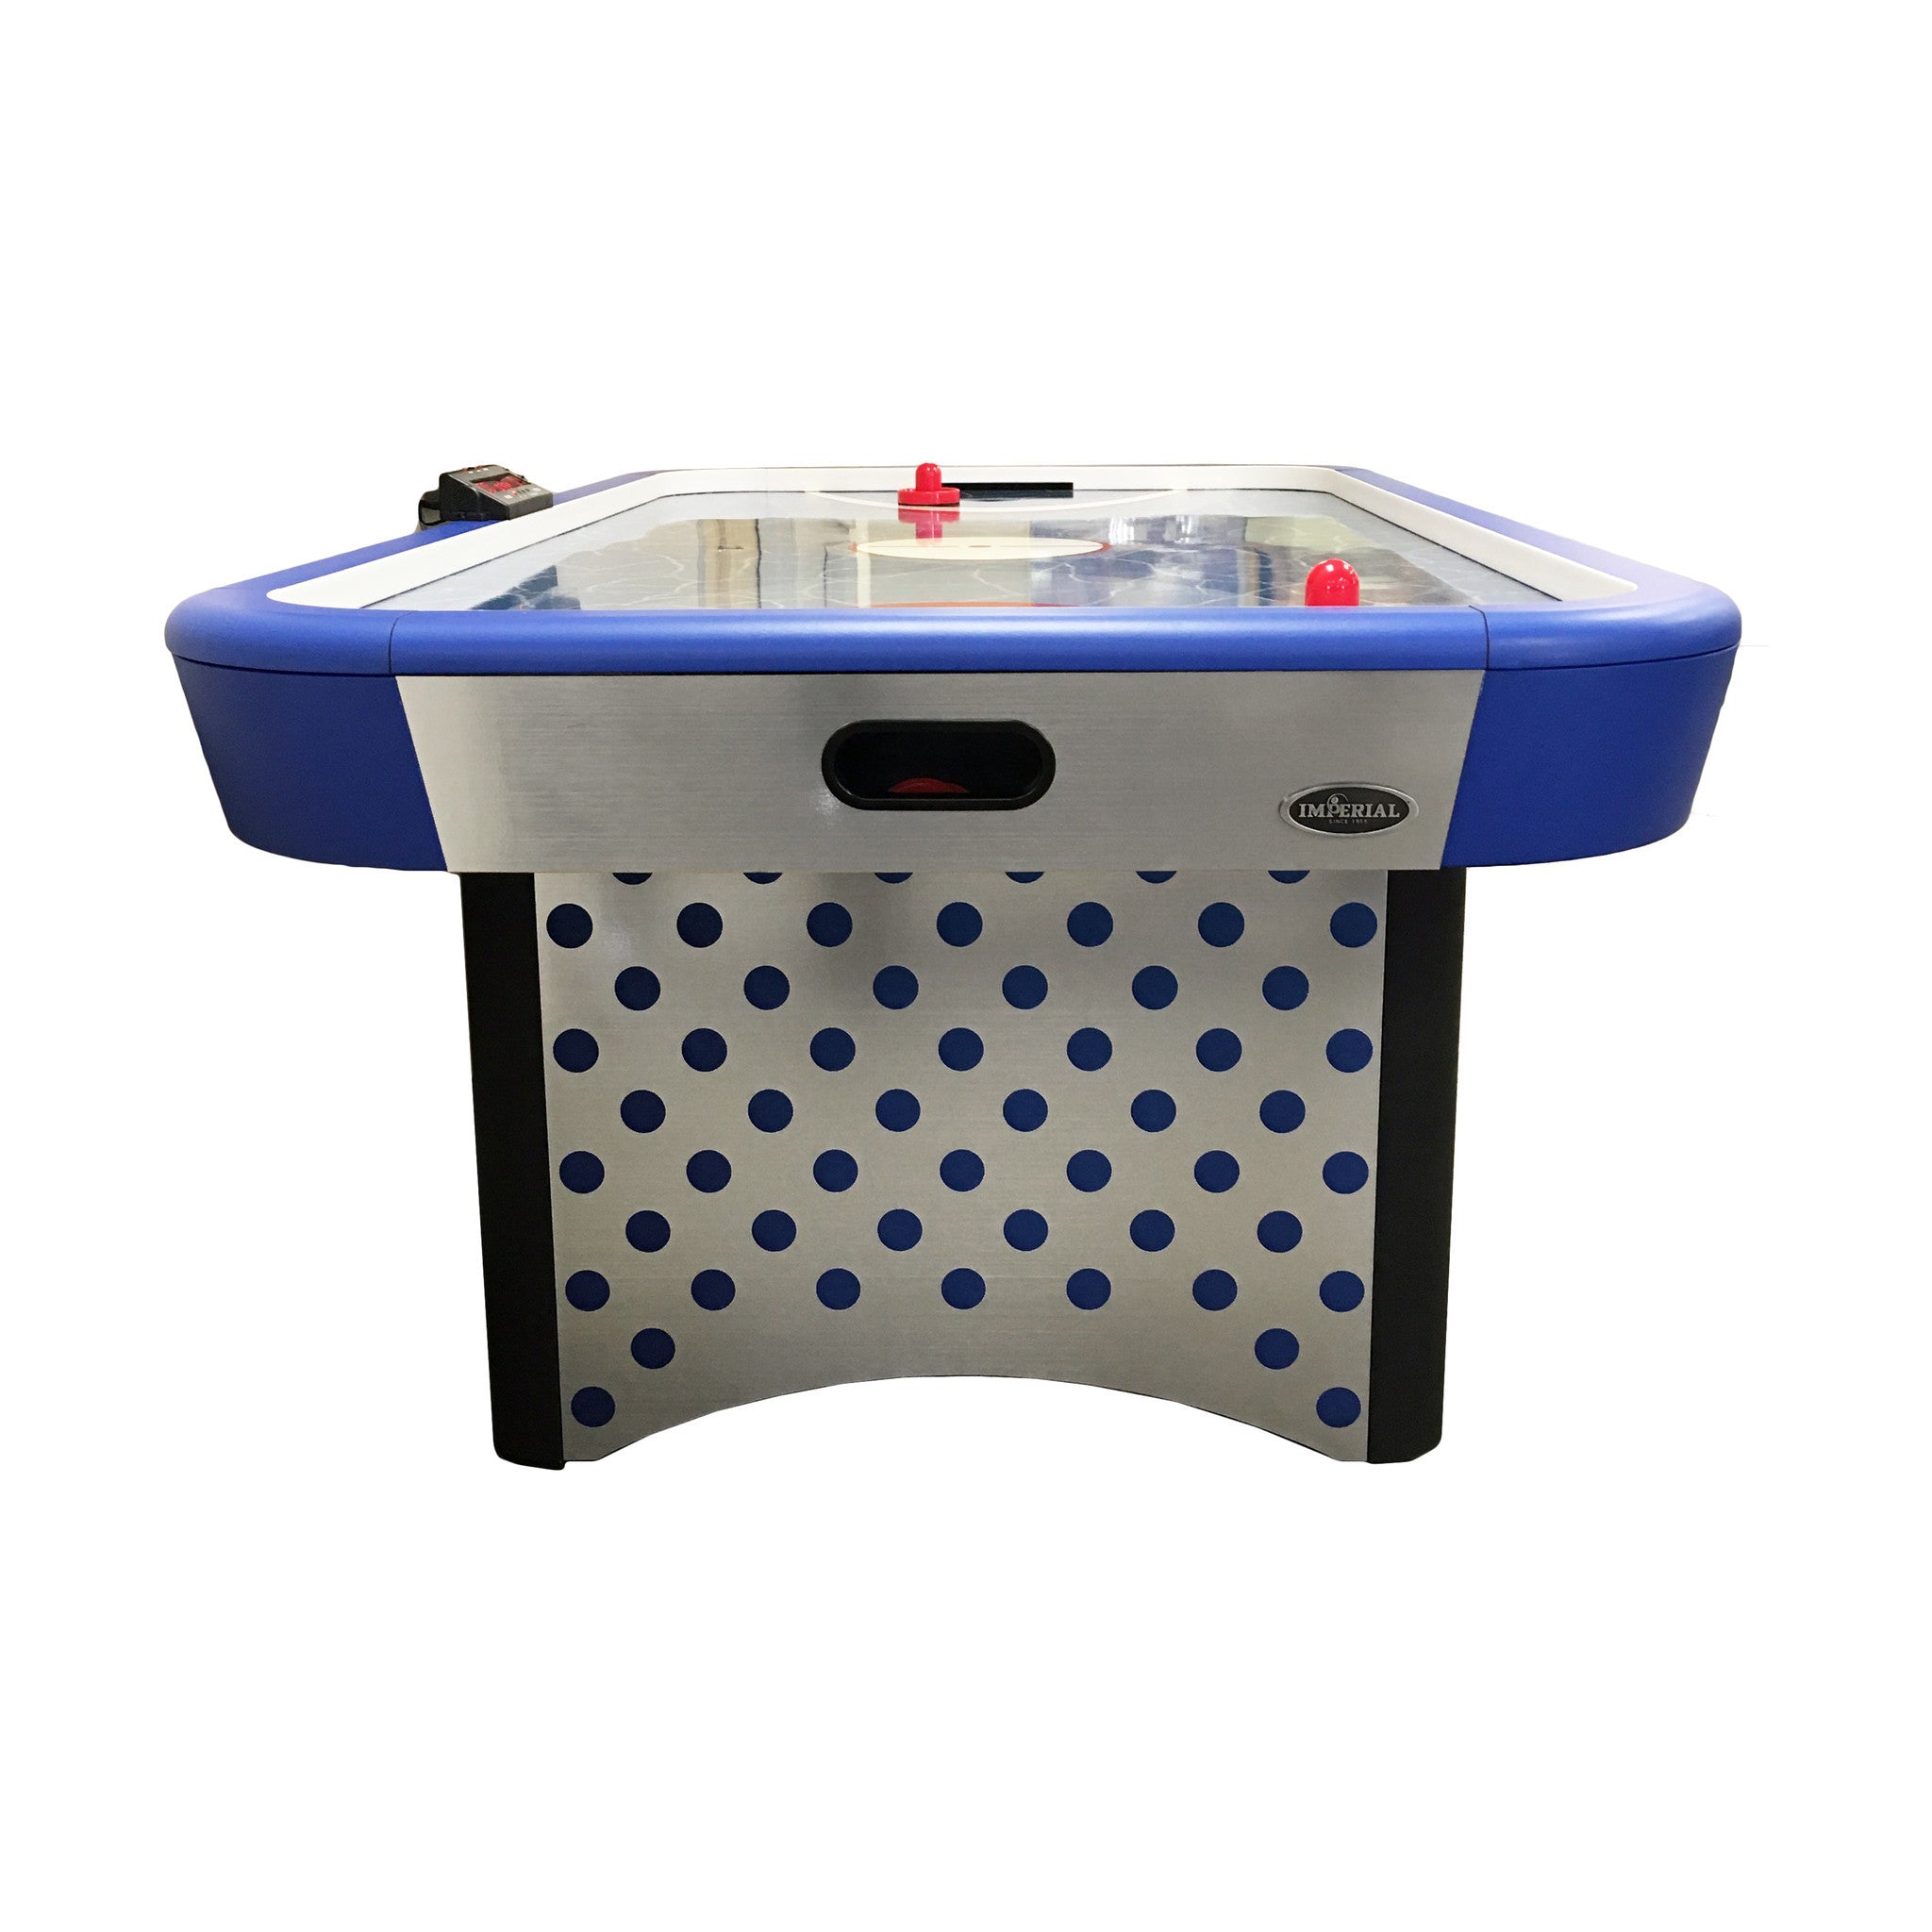 Imperial 7' Playmaker Air Hockey Table with Electronic Scoring